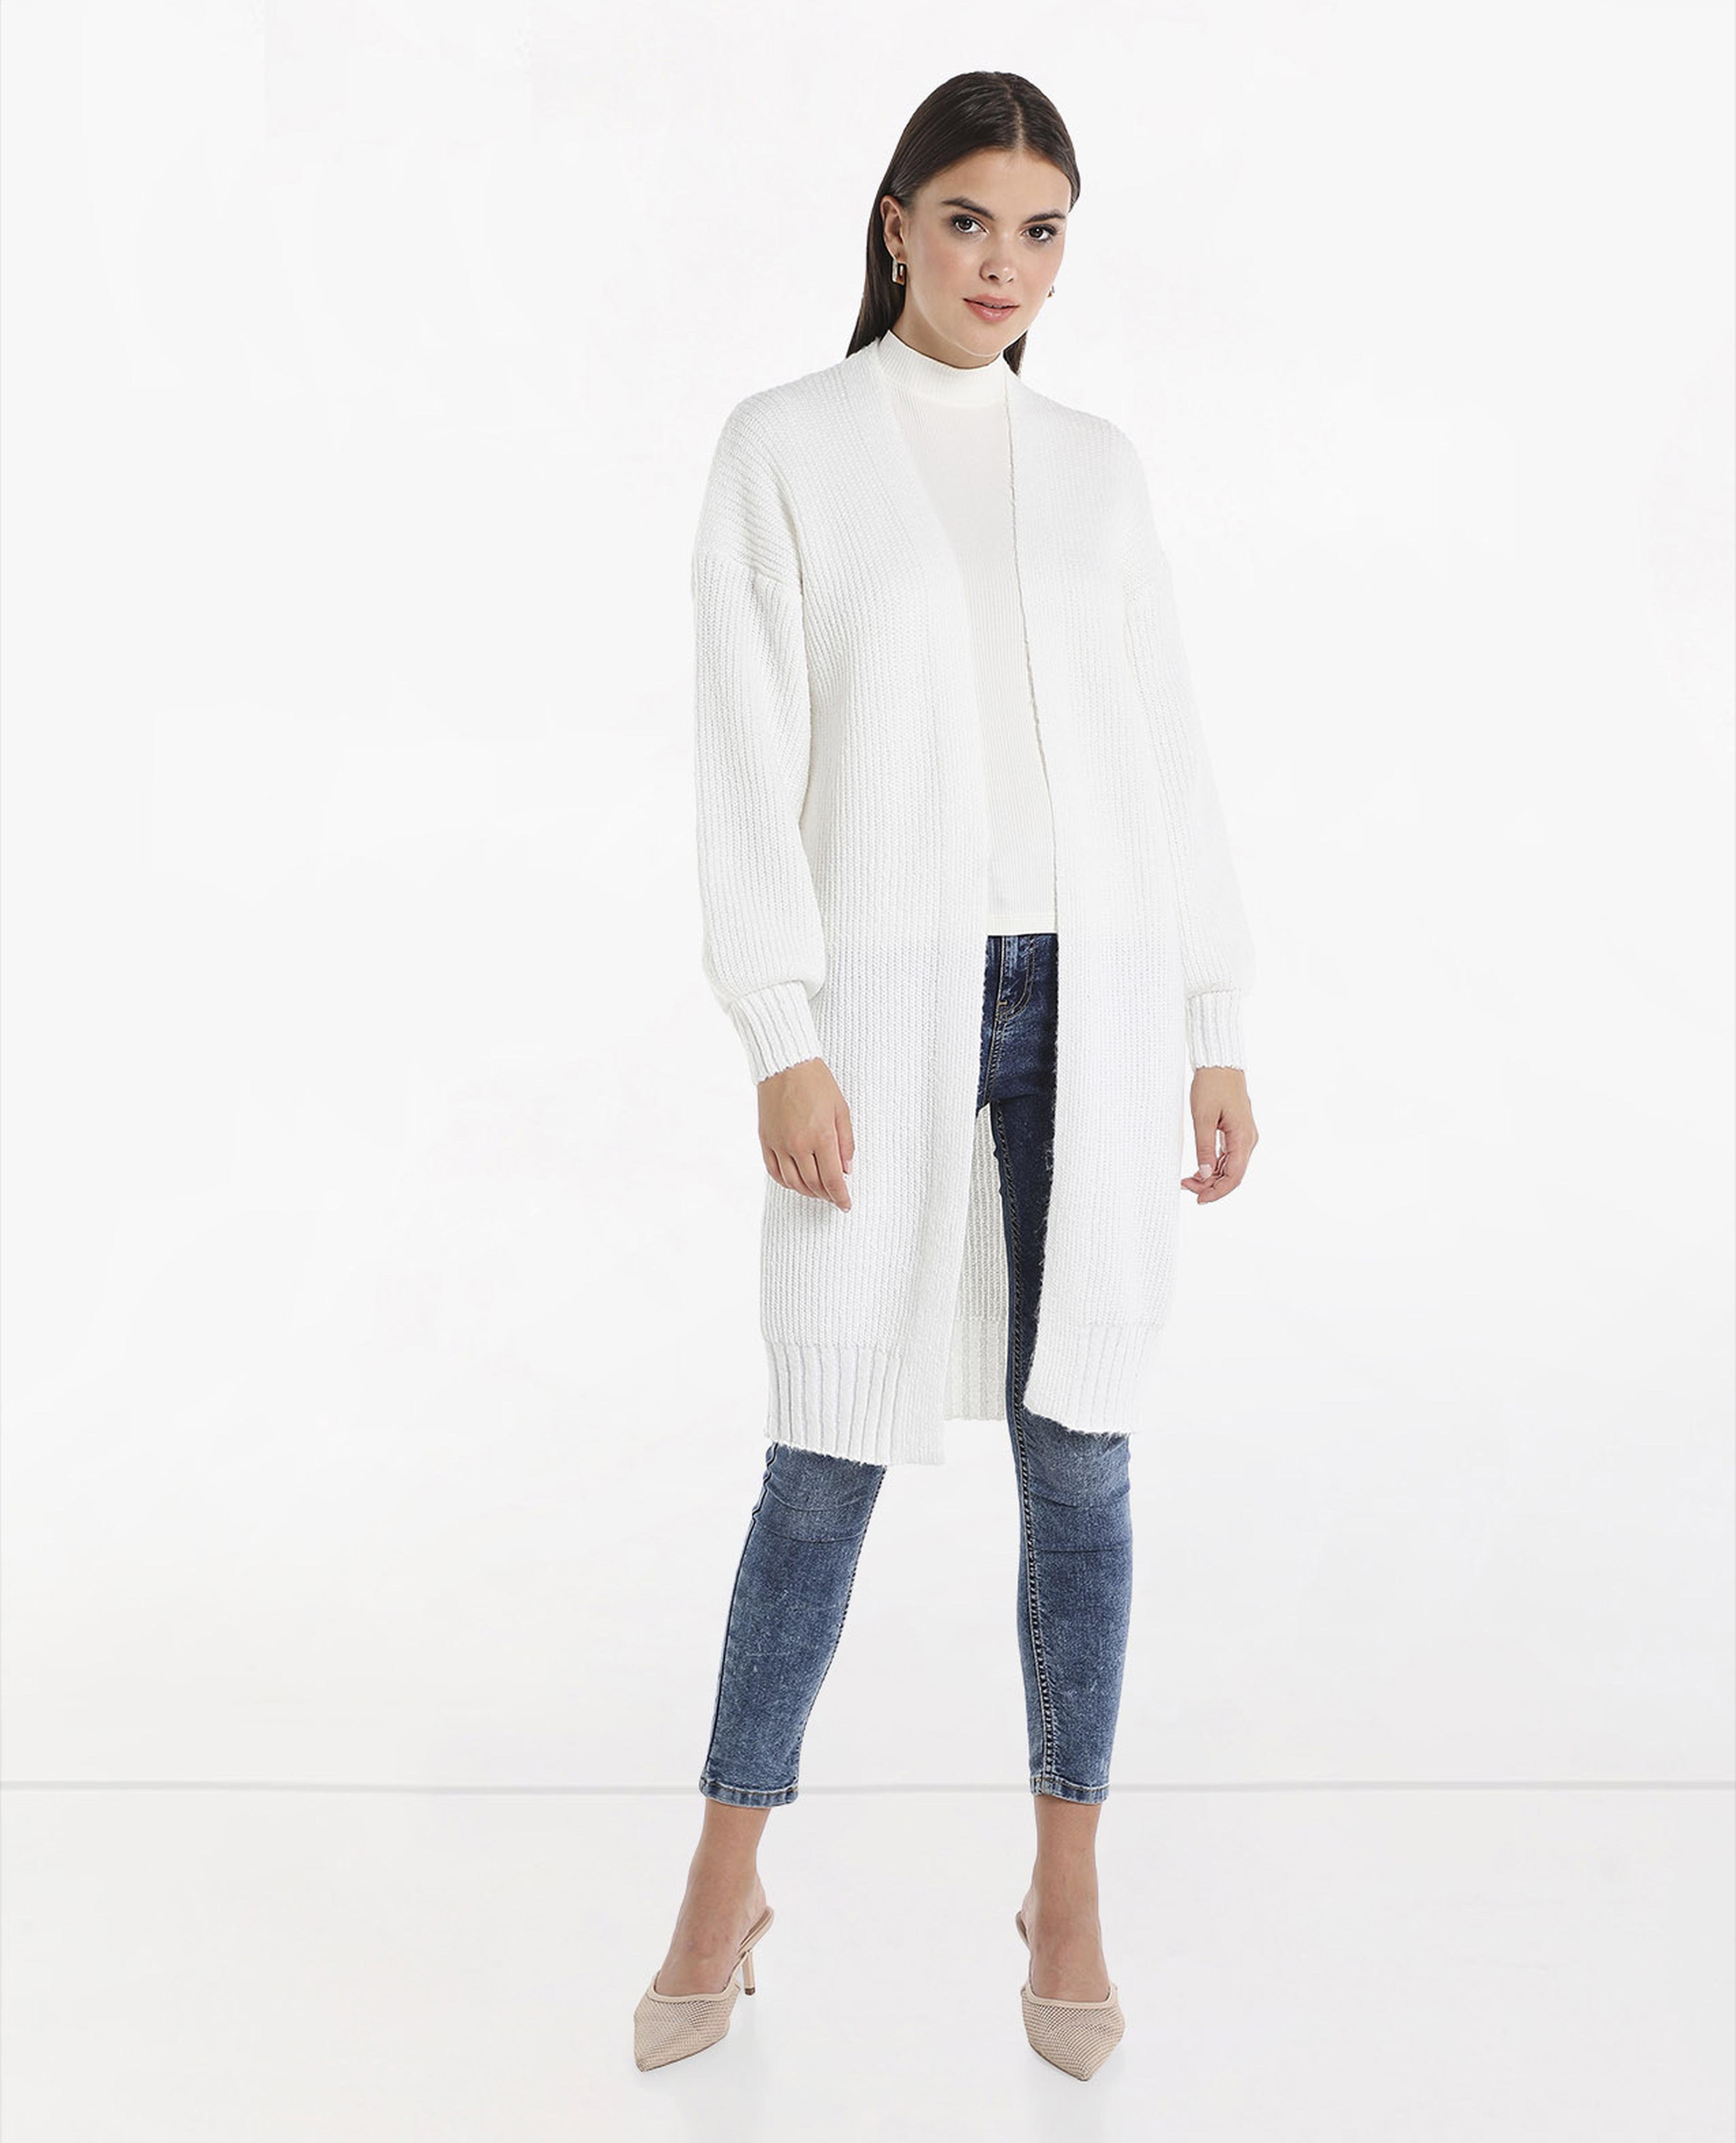 Solid Longline Shrug with Long Sleeves